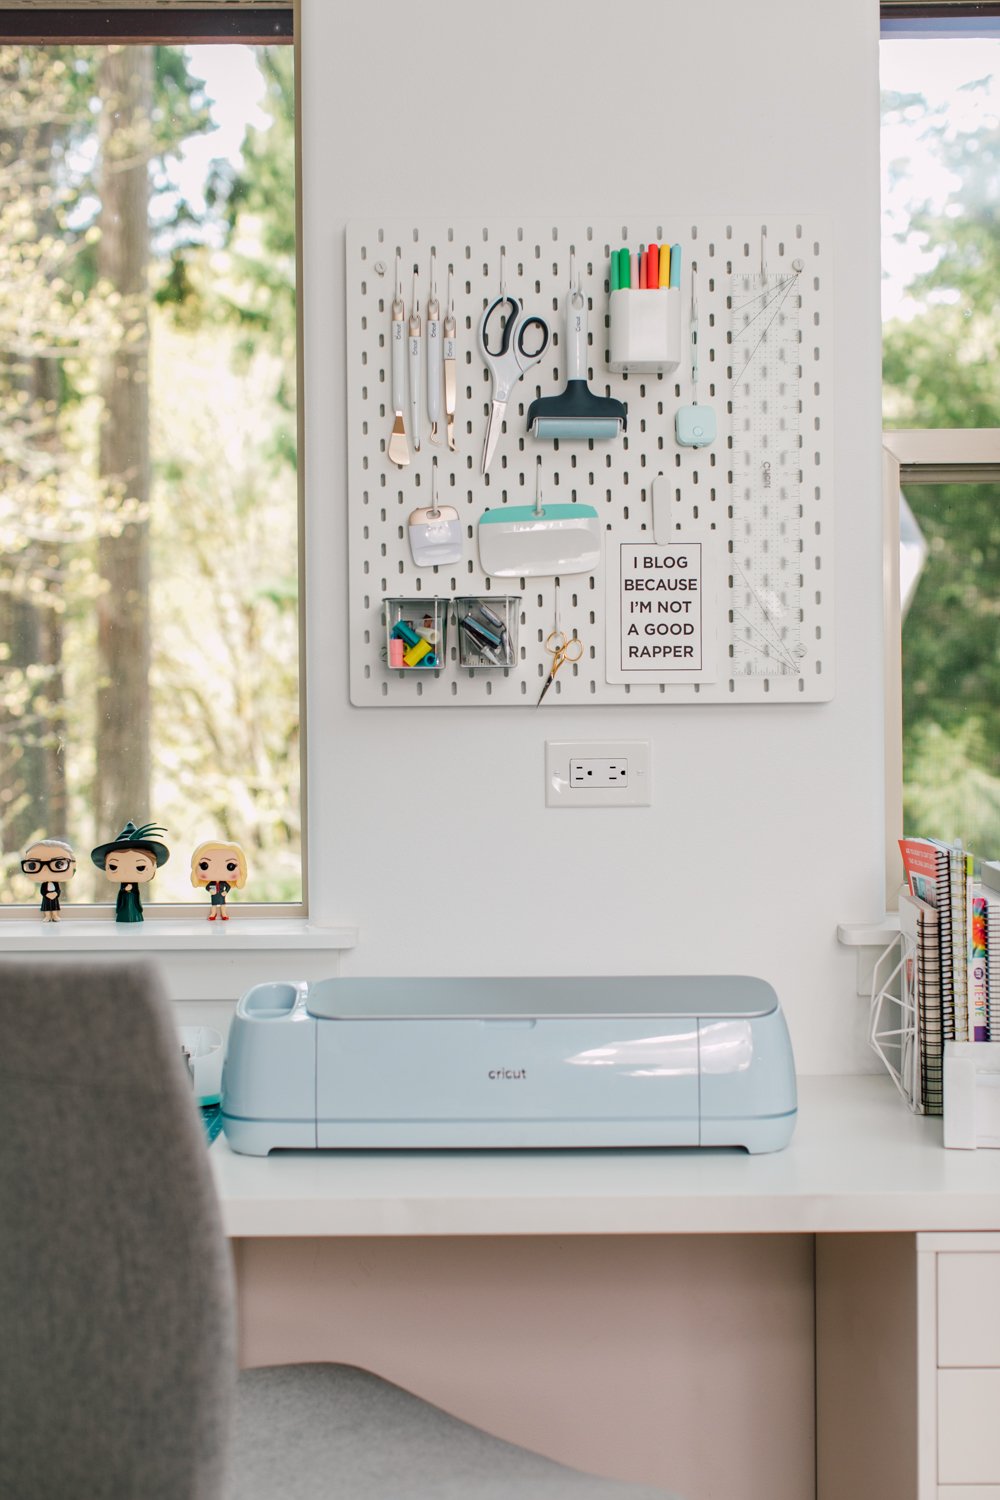 Cricut machine in front of windows with pegboard and Cricut supplies